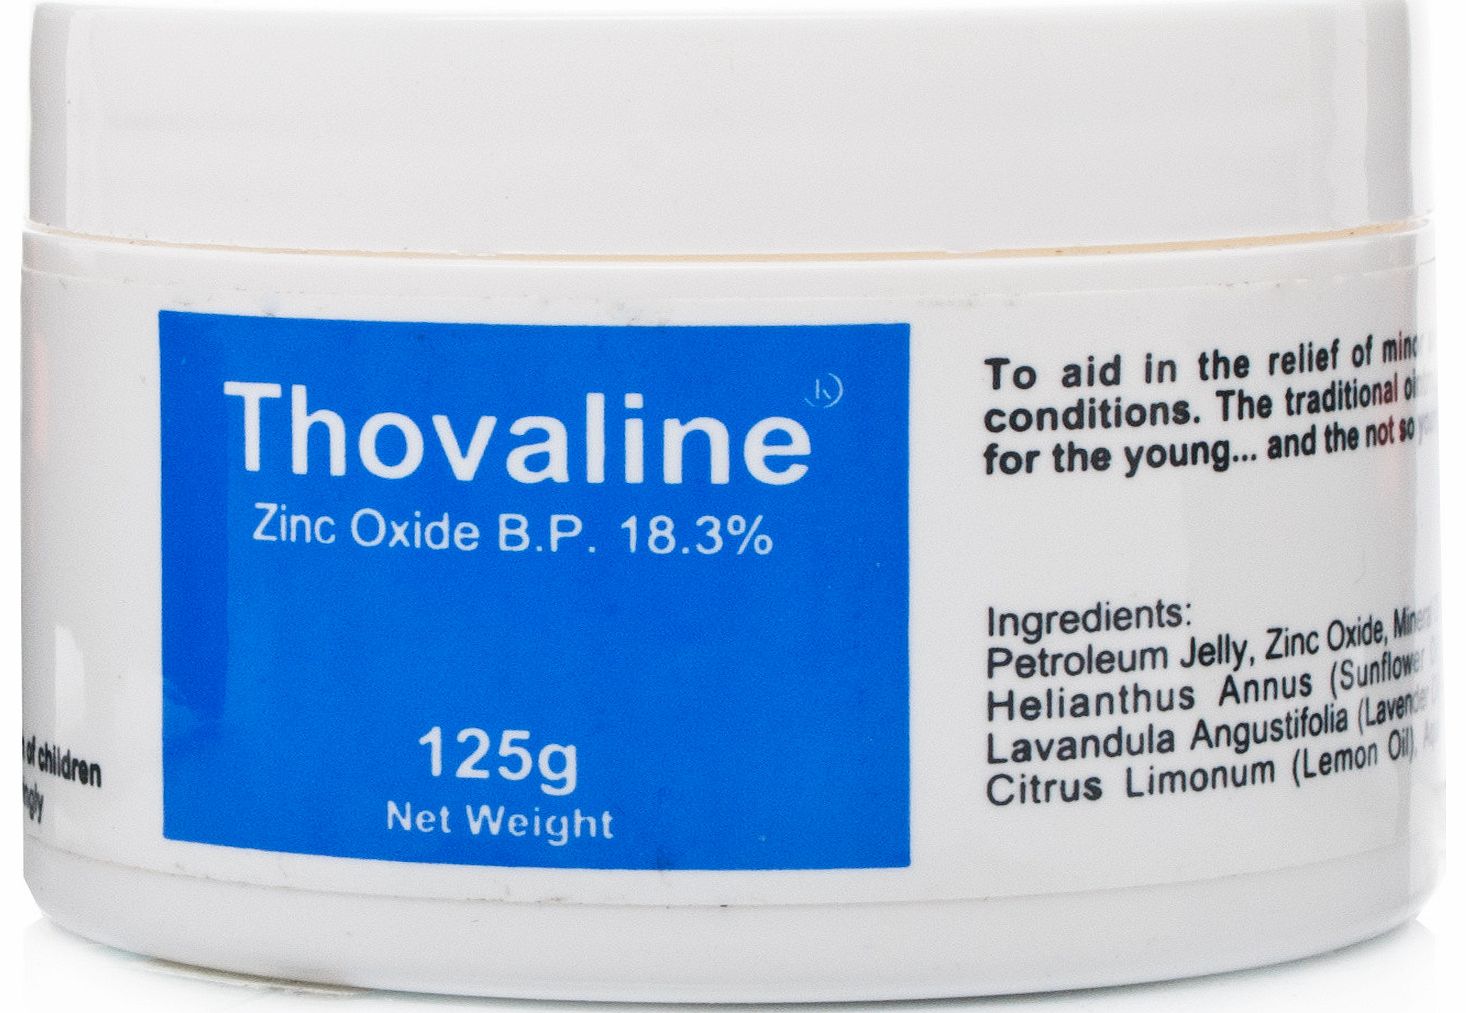 Thovaline Ointment 125g is a private prescription item. To purchase this item you must have a private prescription from your doctor or medical profession. If you require any help or assistance with purchasing Thovaline Ointment 125g please contact ou